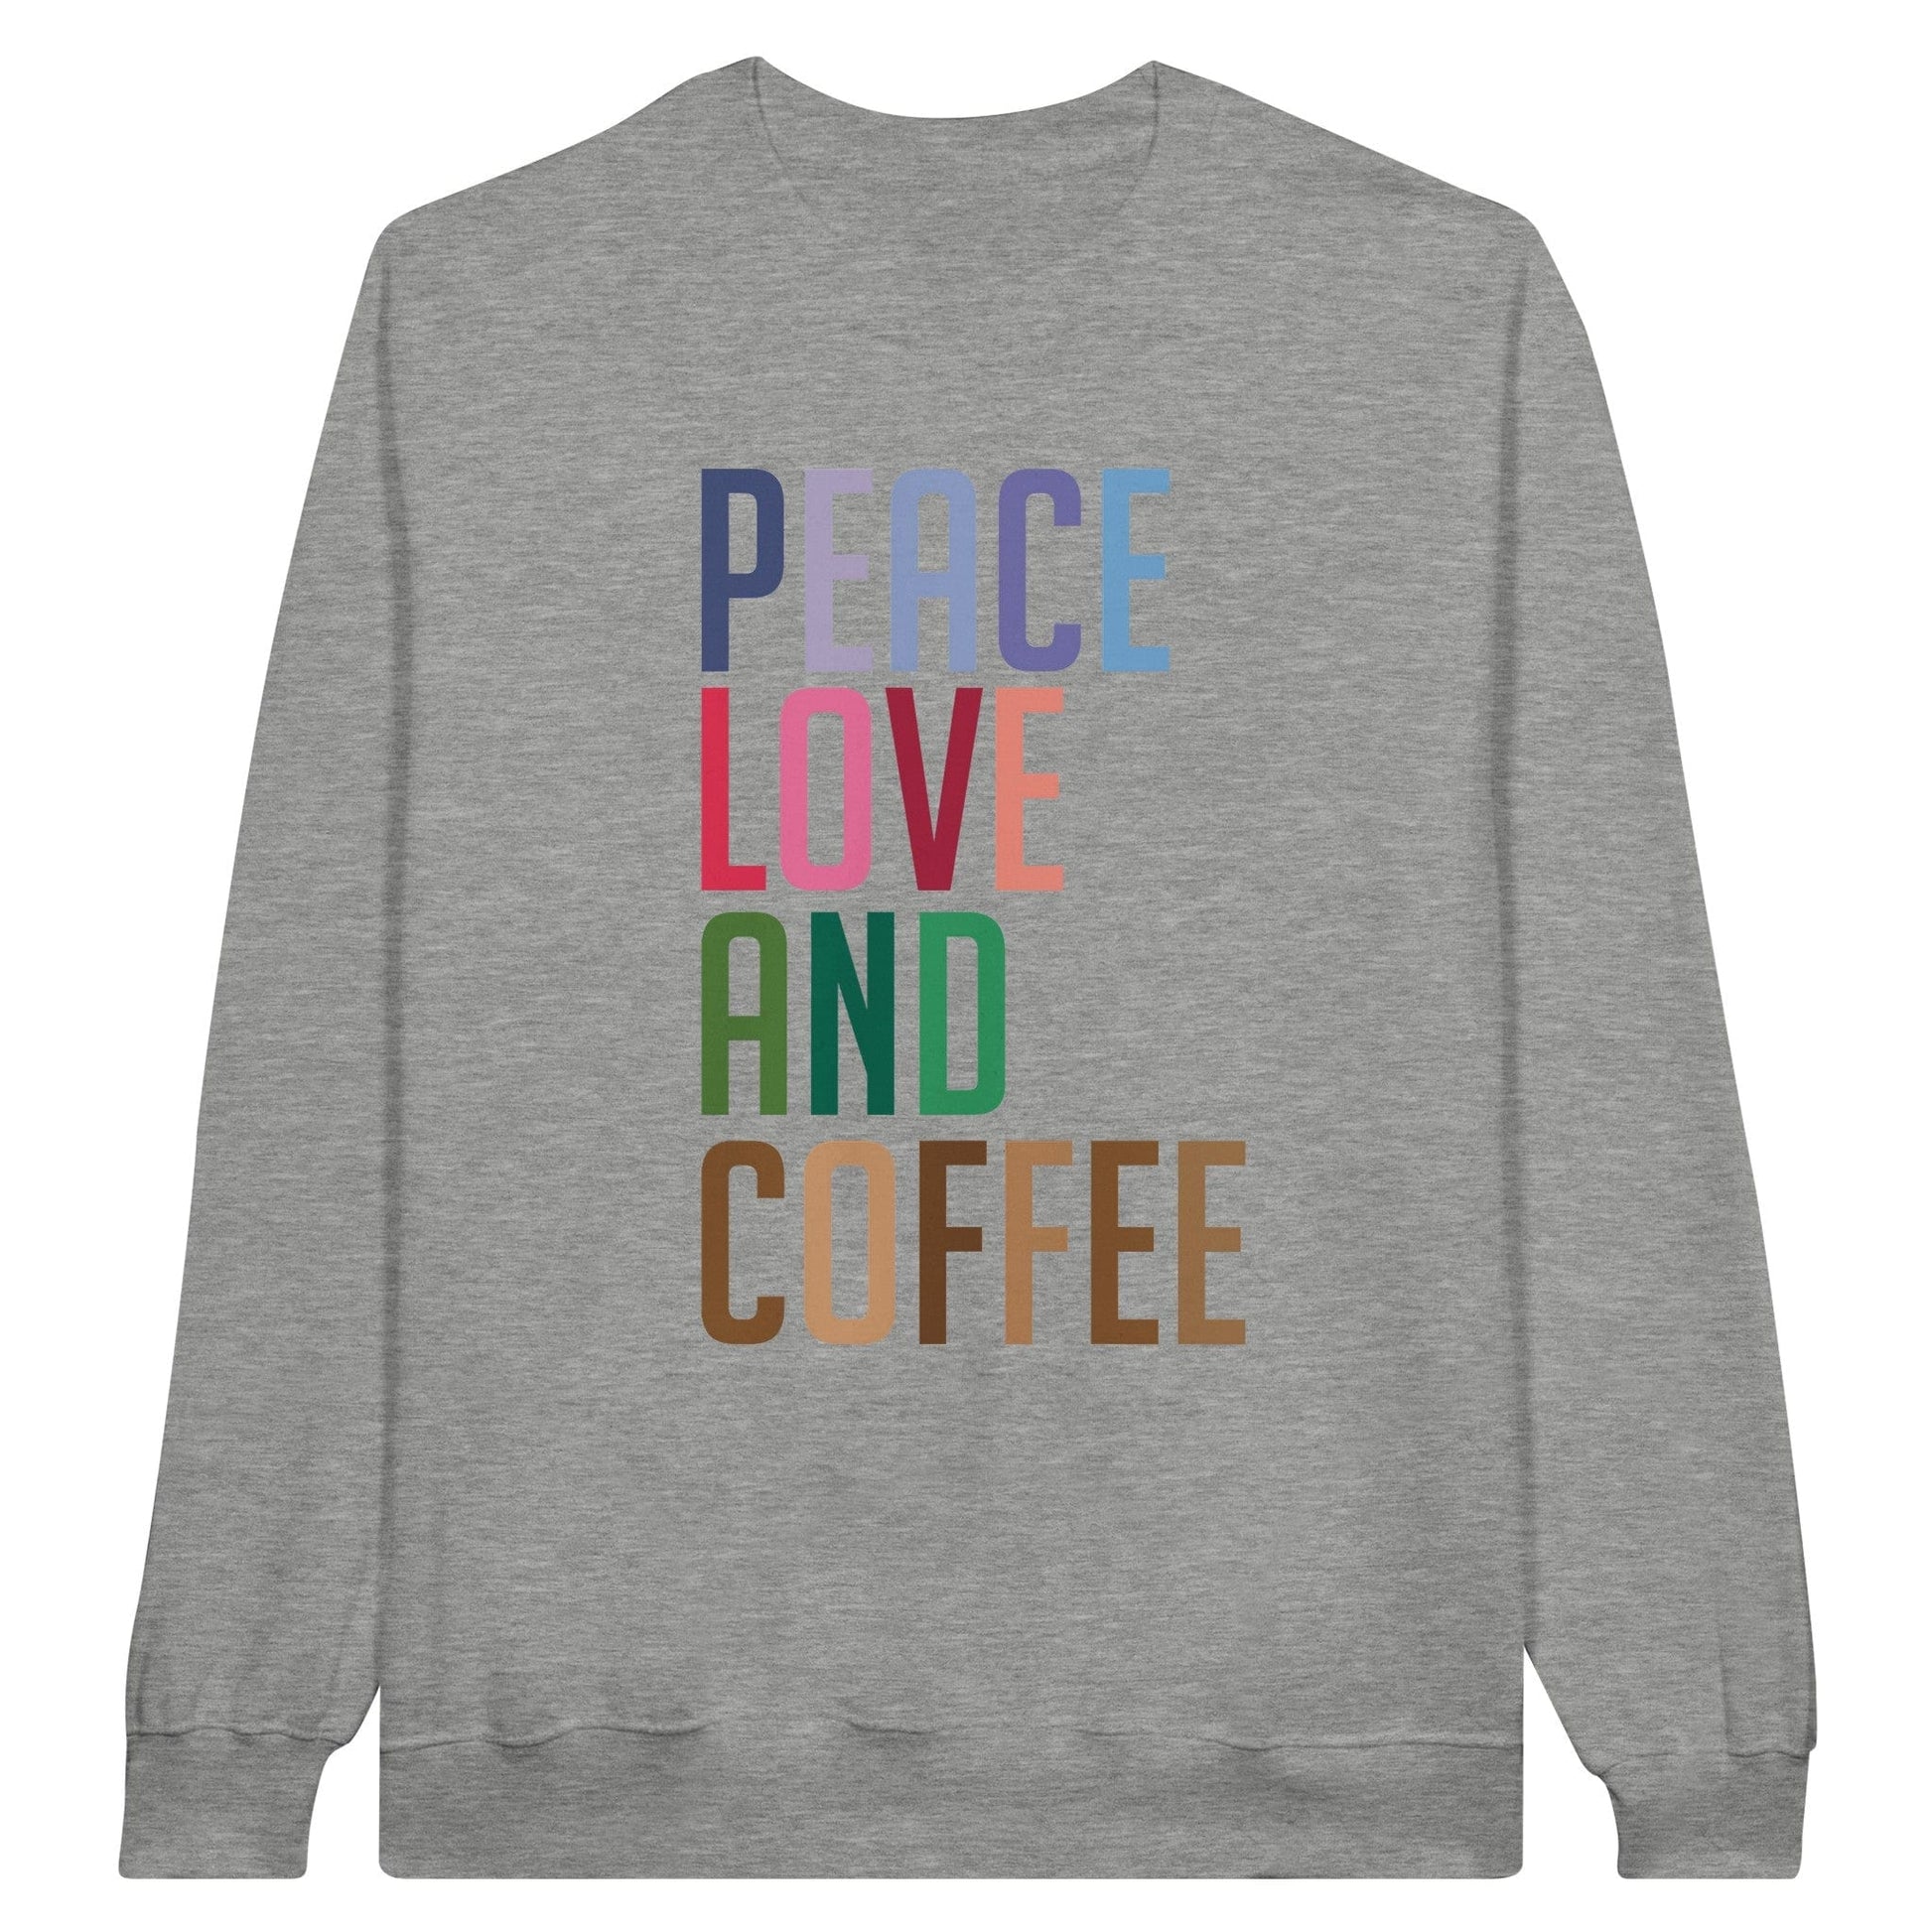 Good Bean Gifts Copy of "Peace Love and Coffee" - Classic Unisex Crewneck Sweatshirt S / Ash